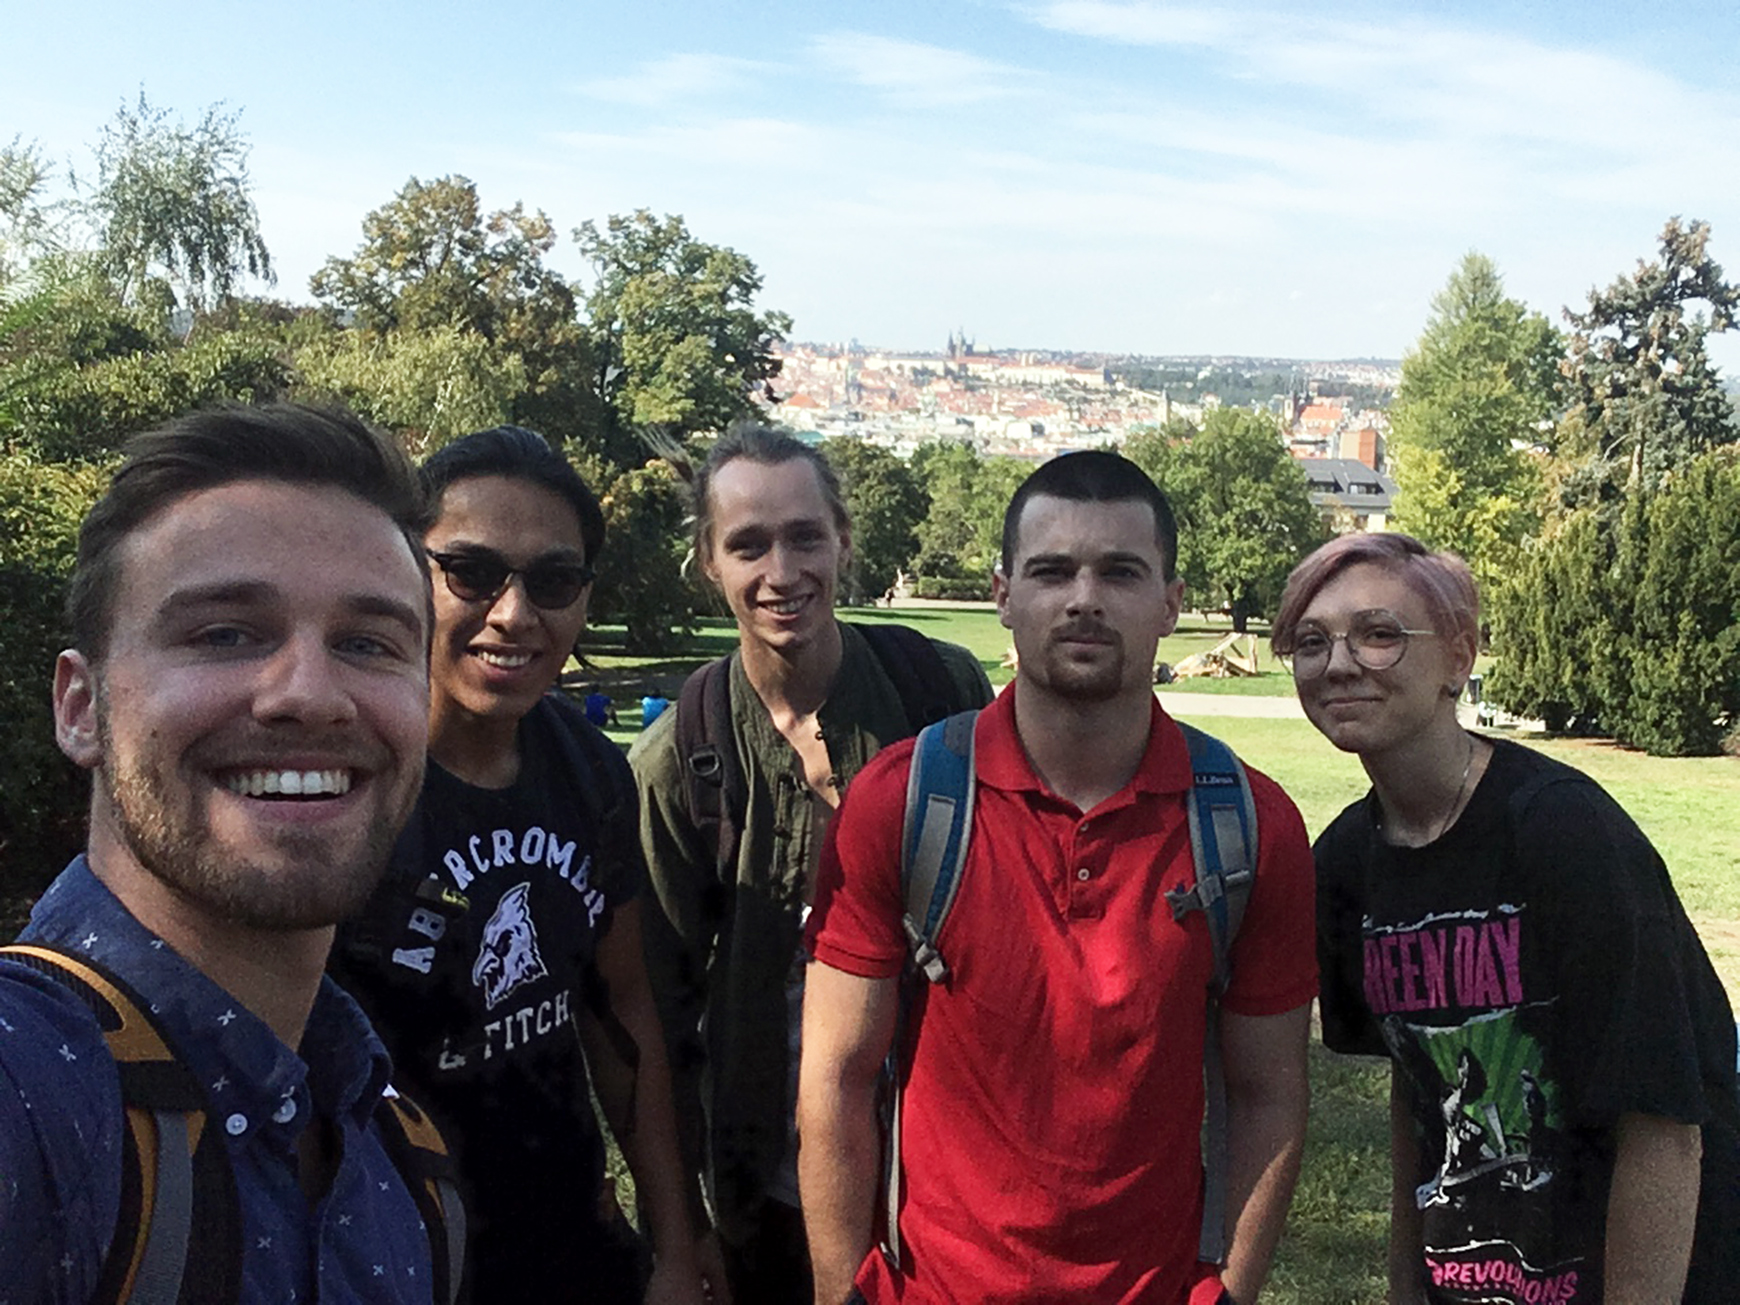 Study abroad in Prague with IFSA